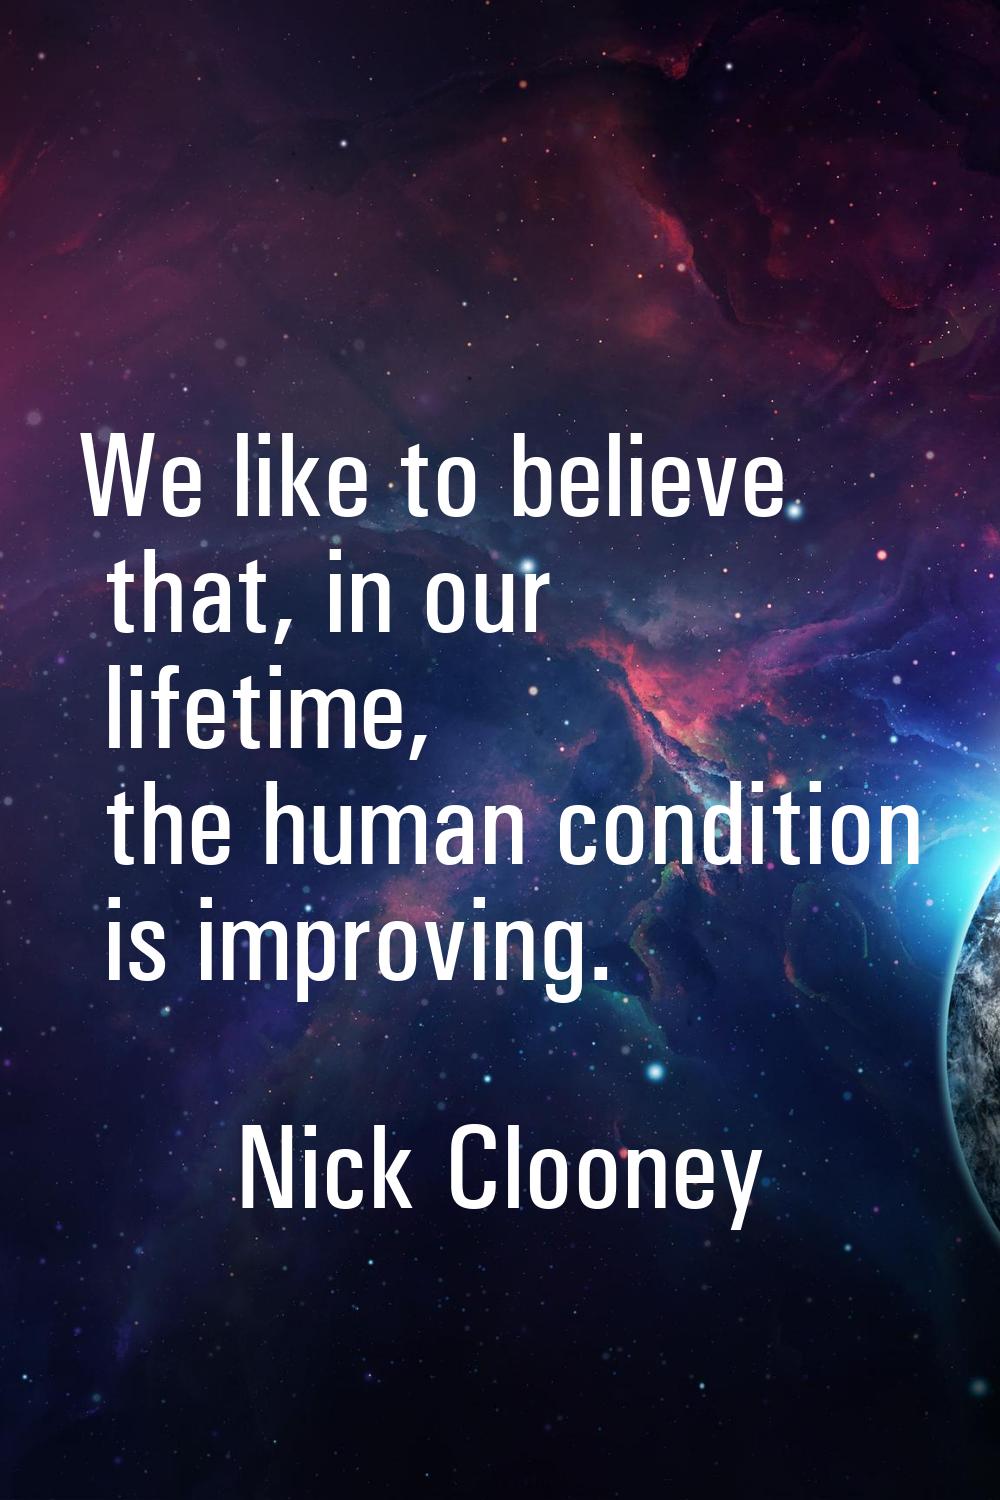 We like to believe that, in our lifetime, the human condition is improving.